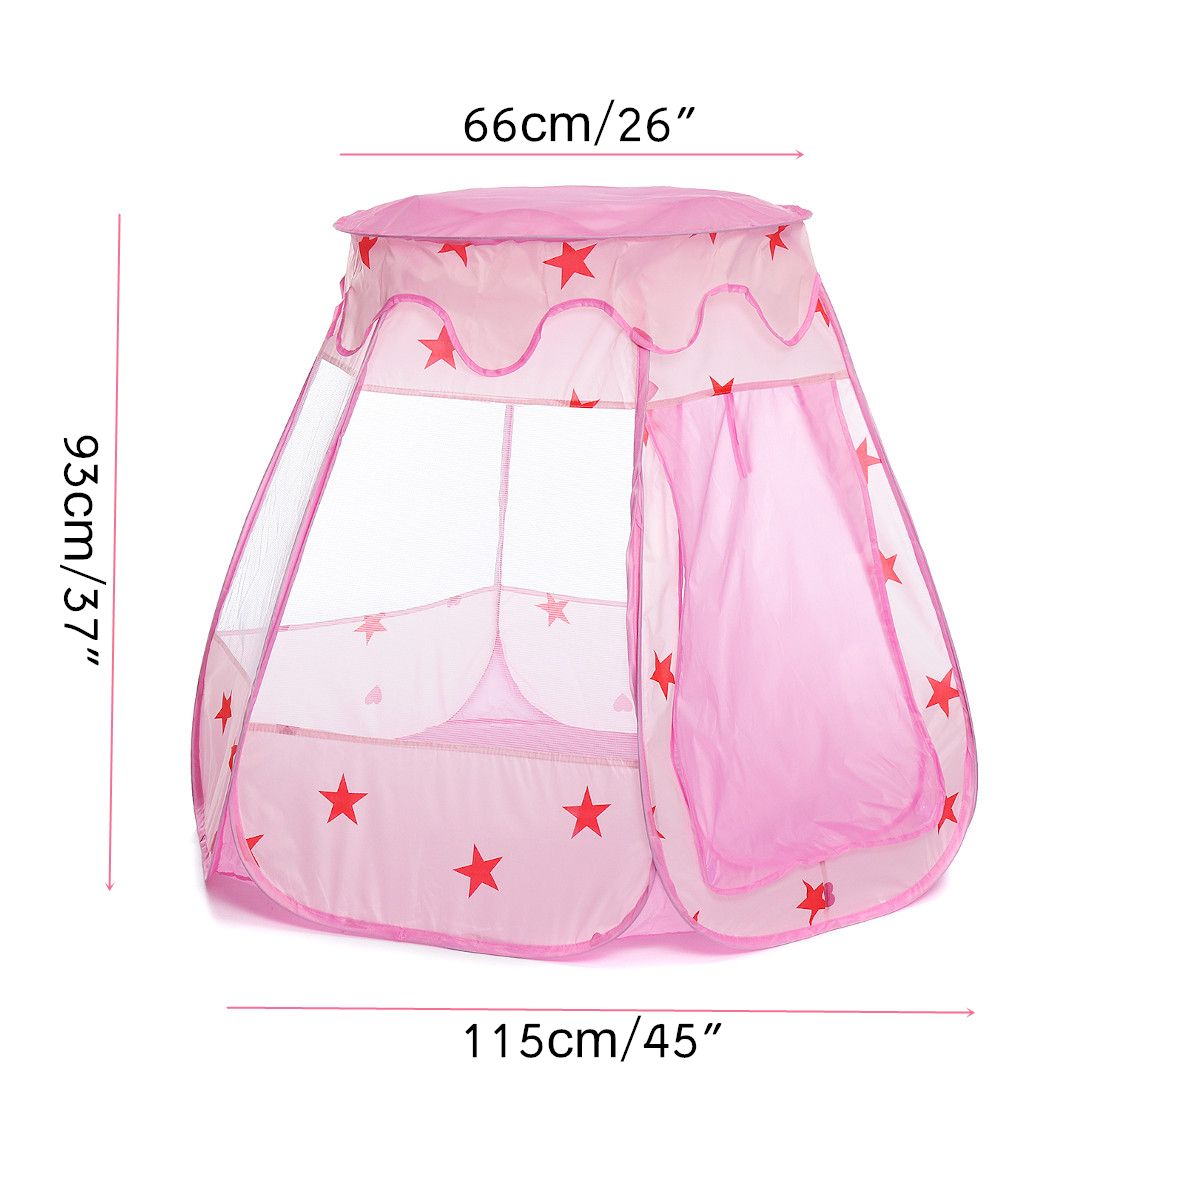 Blue--Pink-Children-Baby-Tent-Ocean-Ball-Pit-Pool-Play-House-Kid-Game-Toy-1640383